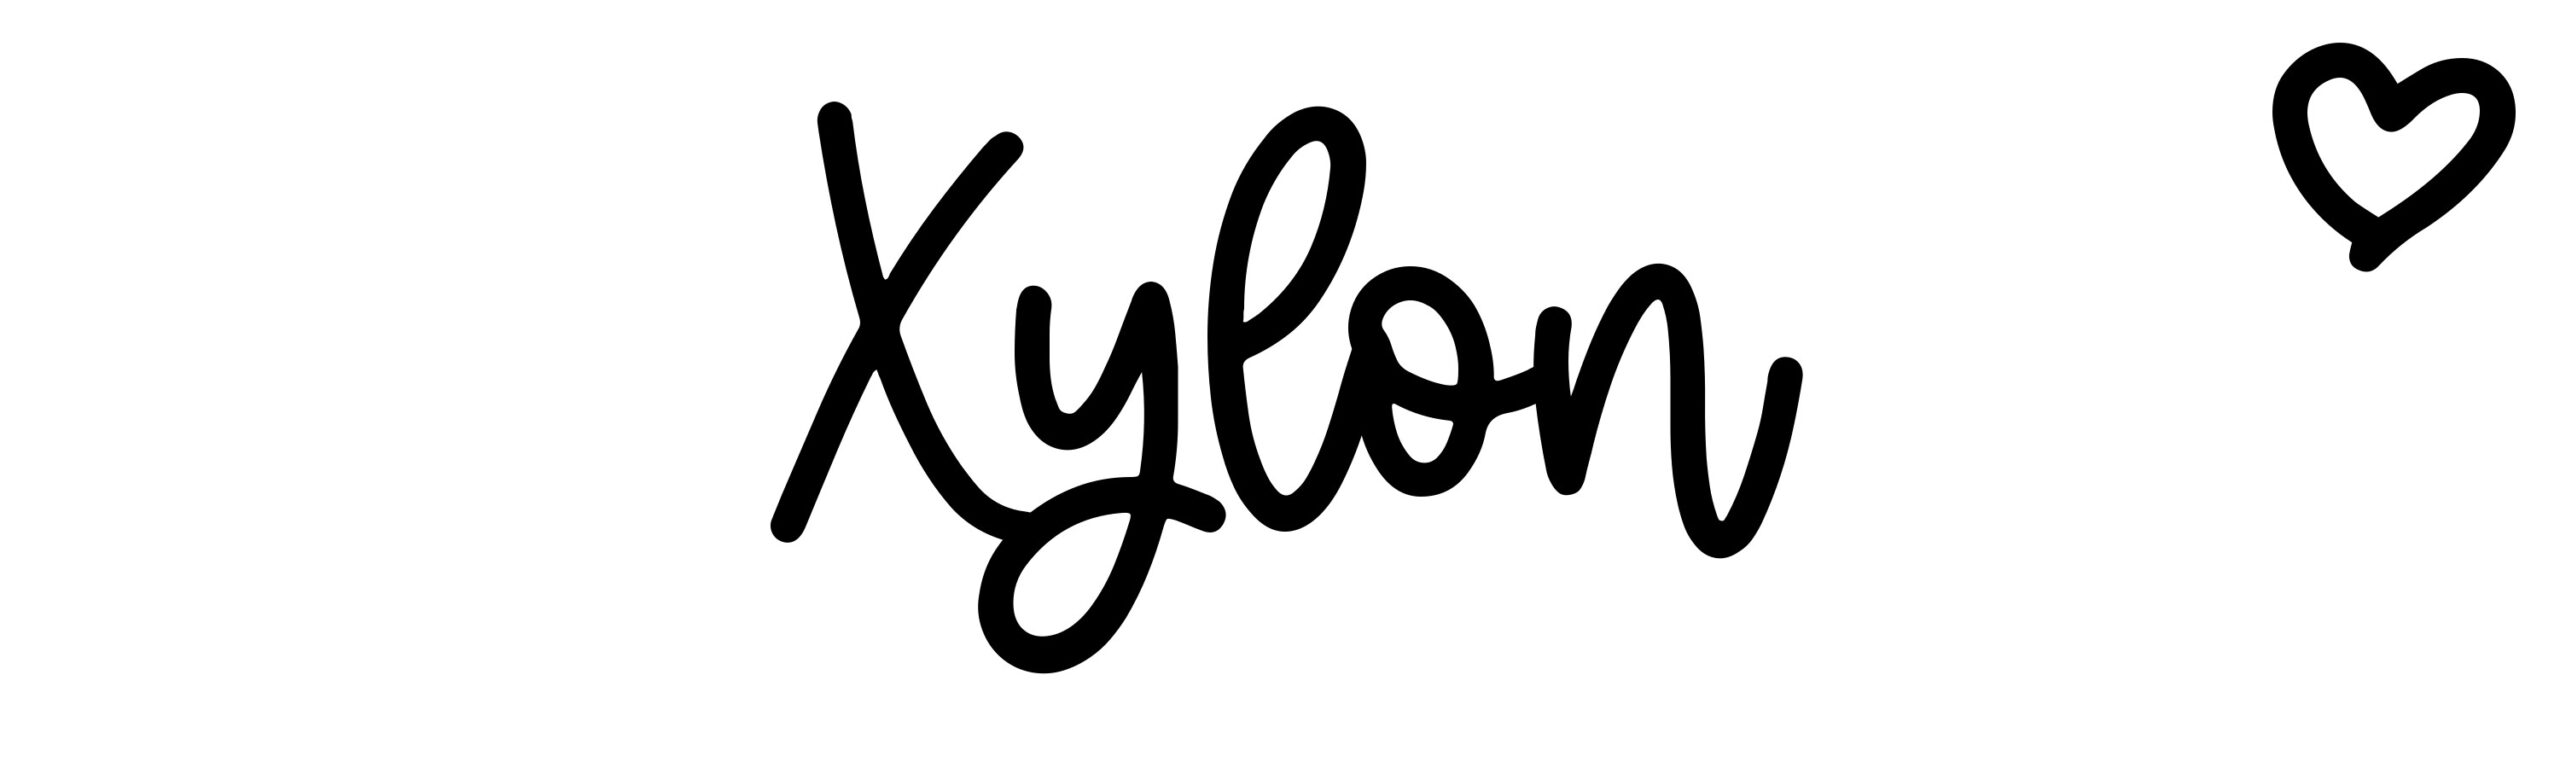 Xylon - Name meaning, origin, variations and more